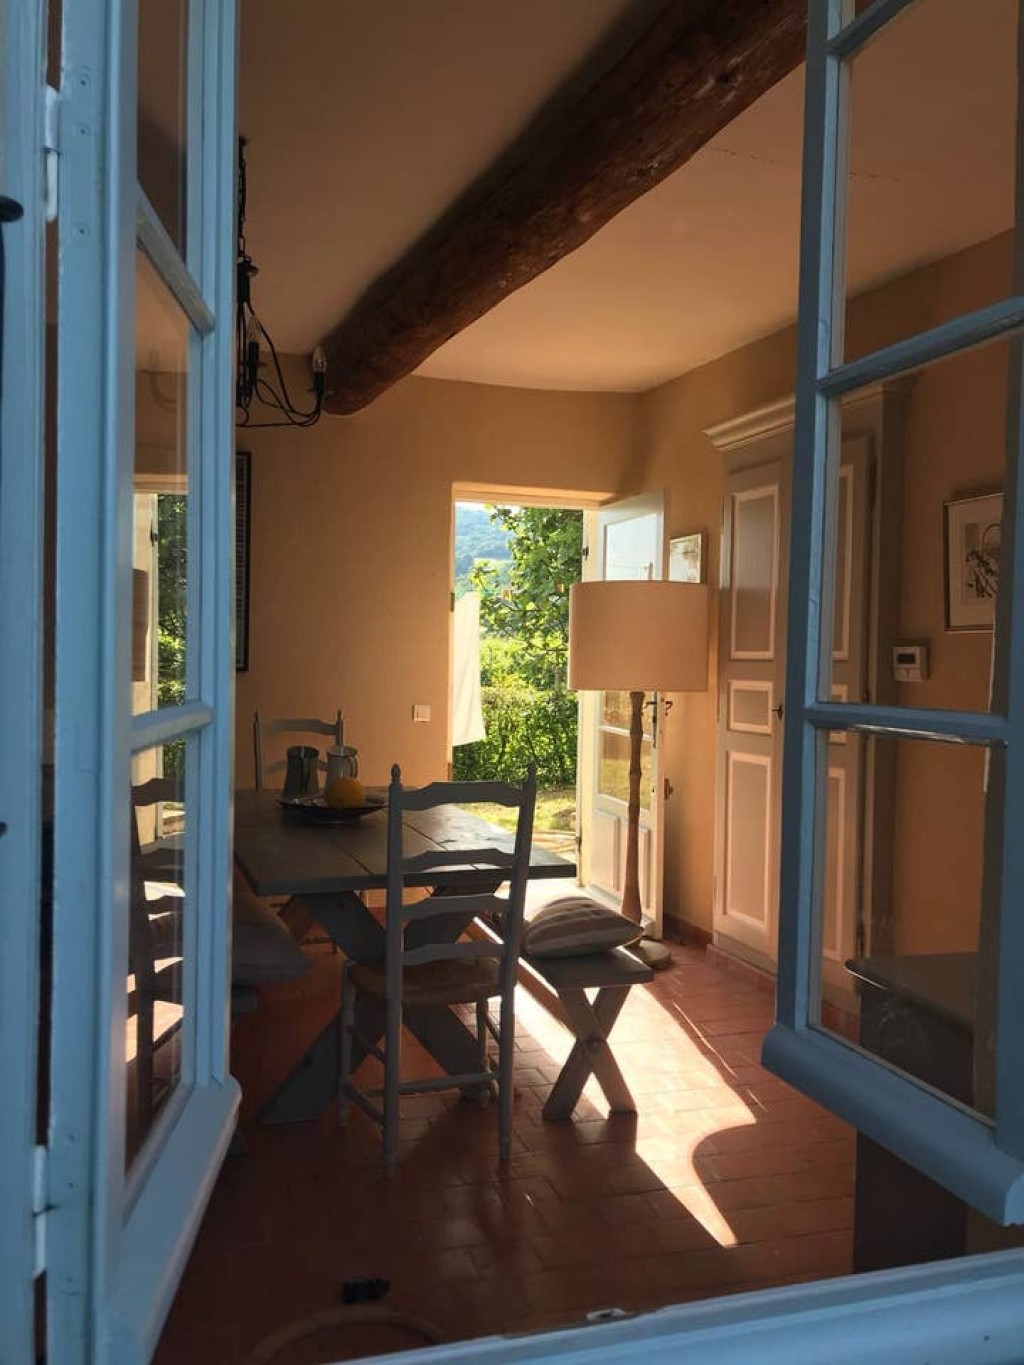 Images for Long Term Rentals in France, Saint-Roman-de-Malegarde, Vaucluse EAID: BID:homefromhome